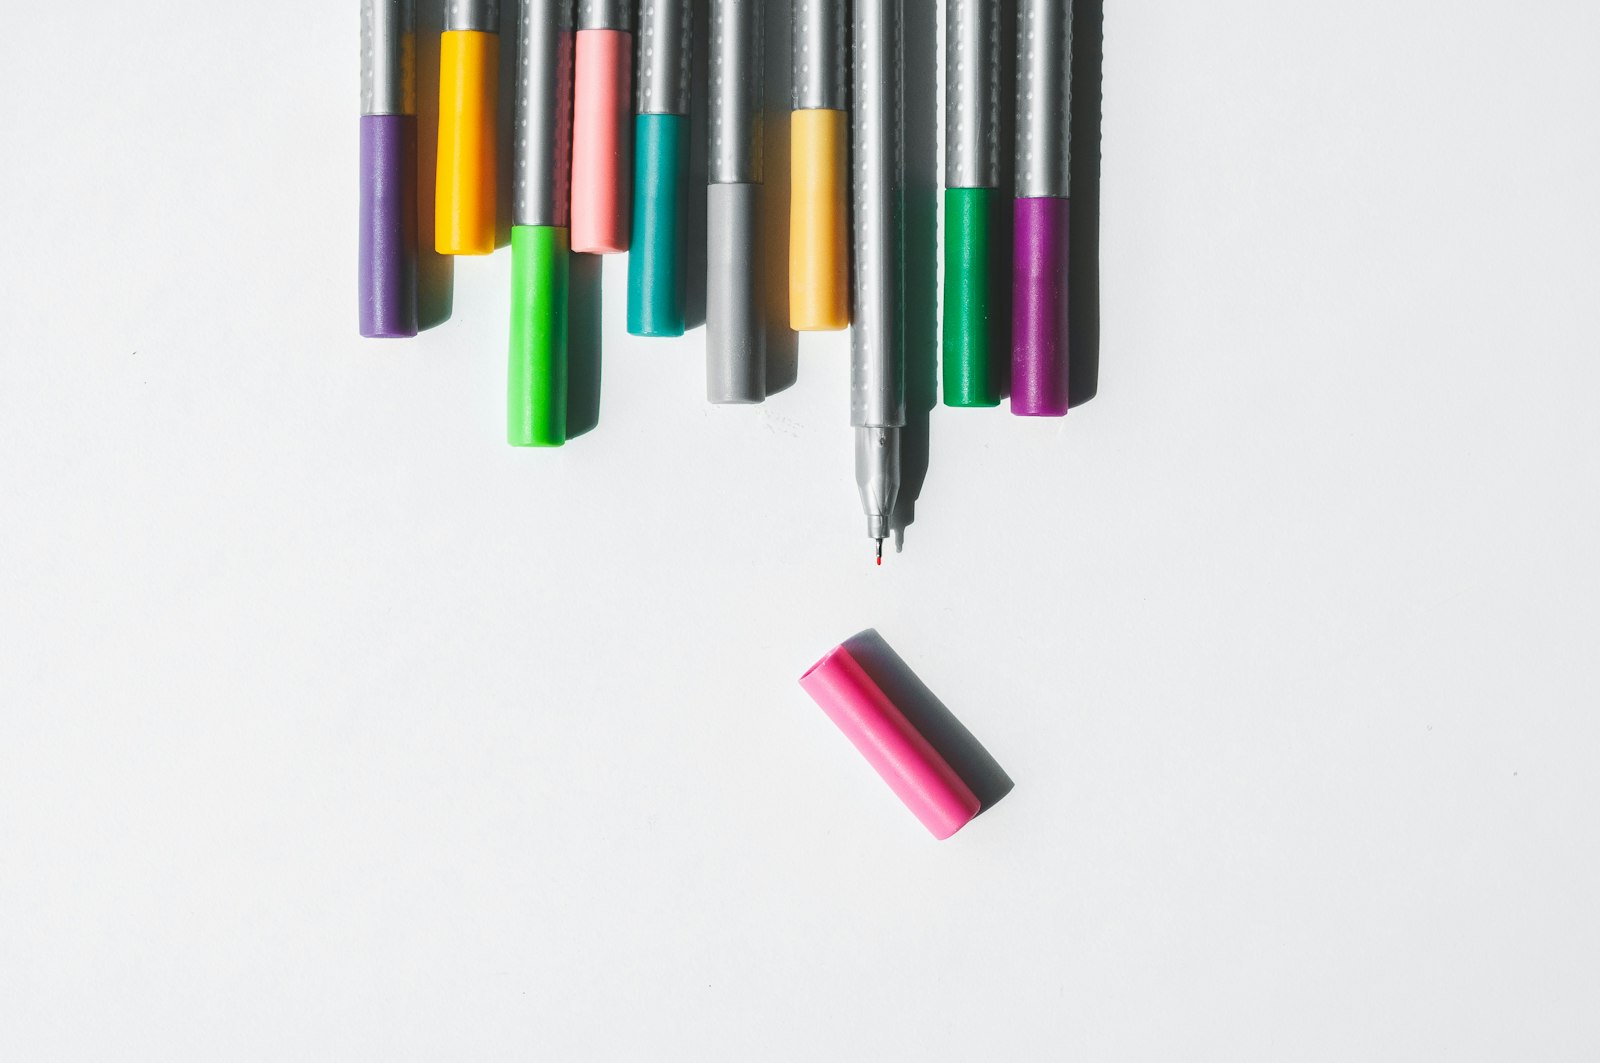 Nikon D90 sample photo. Assorted-color on pens on photography